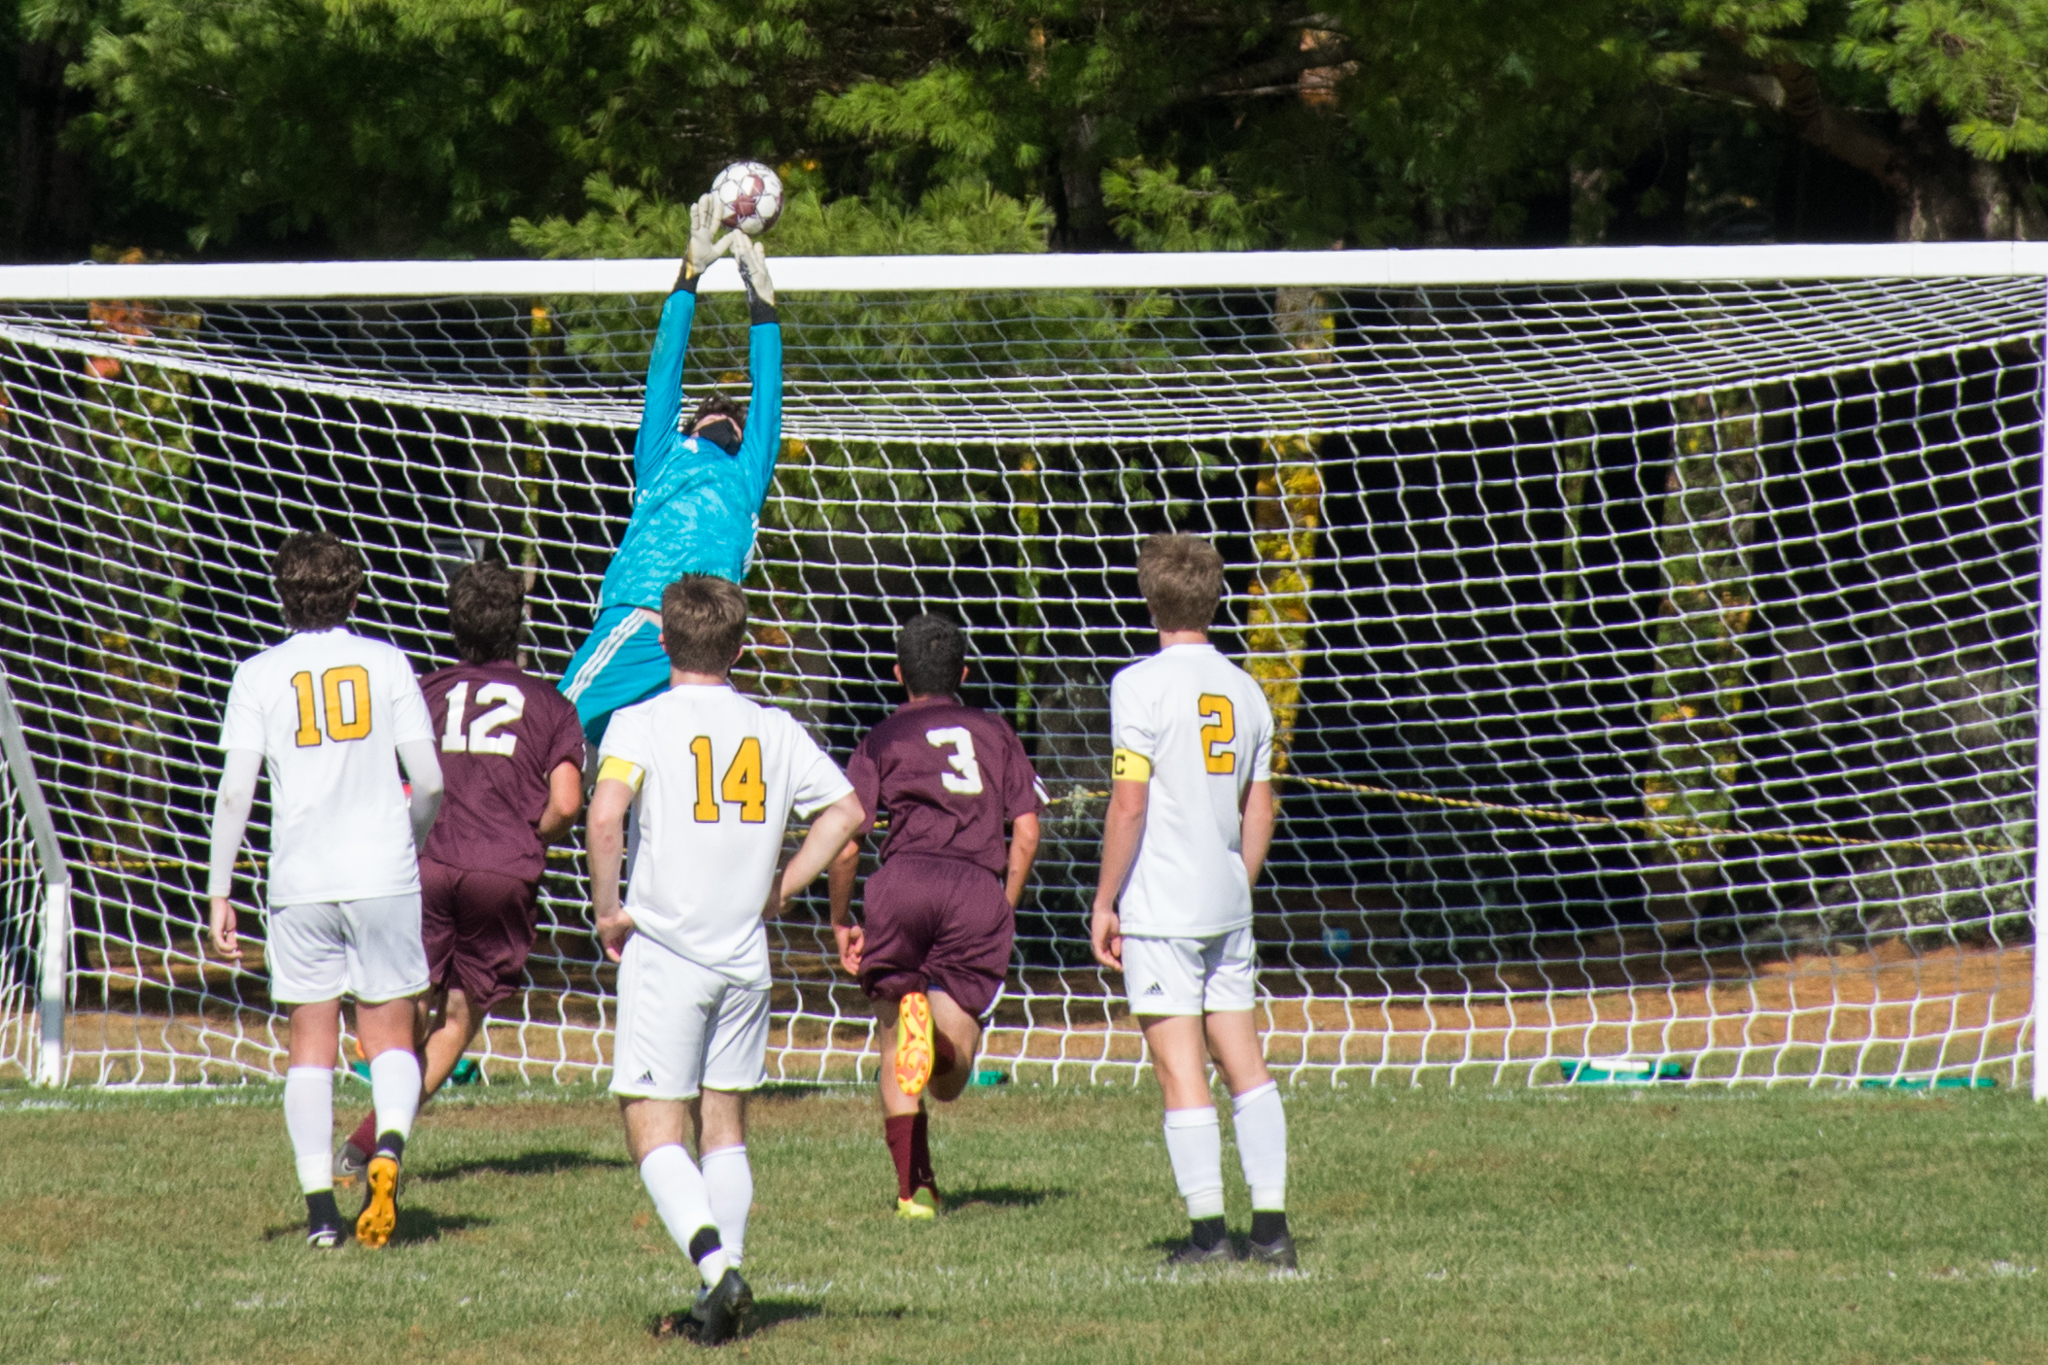 Harwood goalie Jake Collier makes a save in the 2nd half against North Country. Harwood won 2-1. Photo: Jeff Knight